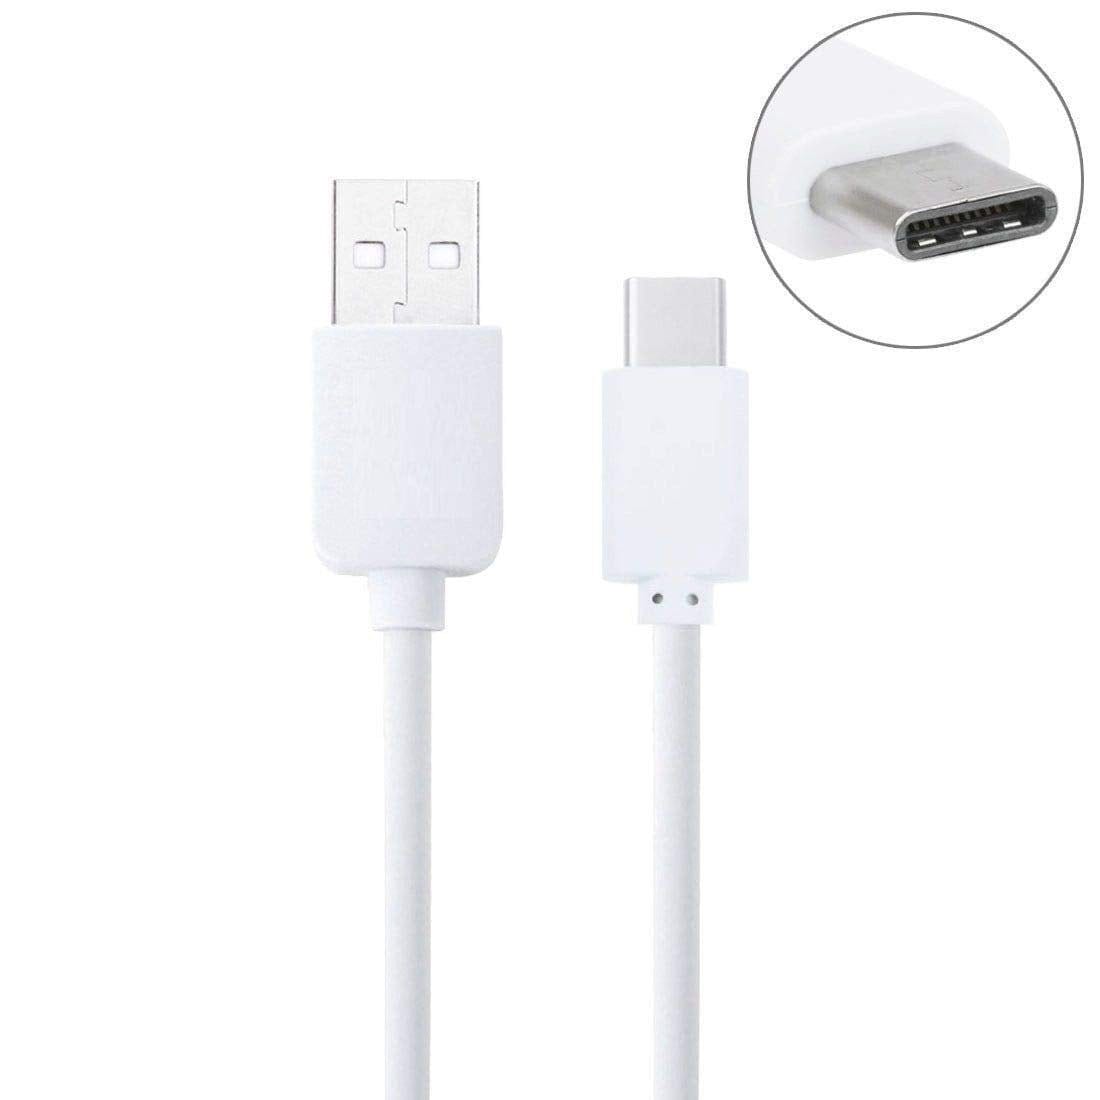 Samsung Galaxy A51 USB to Type C Charging Cable In Car White - 25 CM Short - SmartPhoneGadgetUK